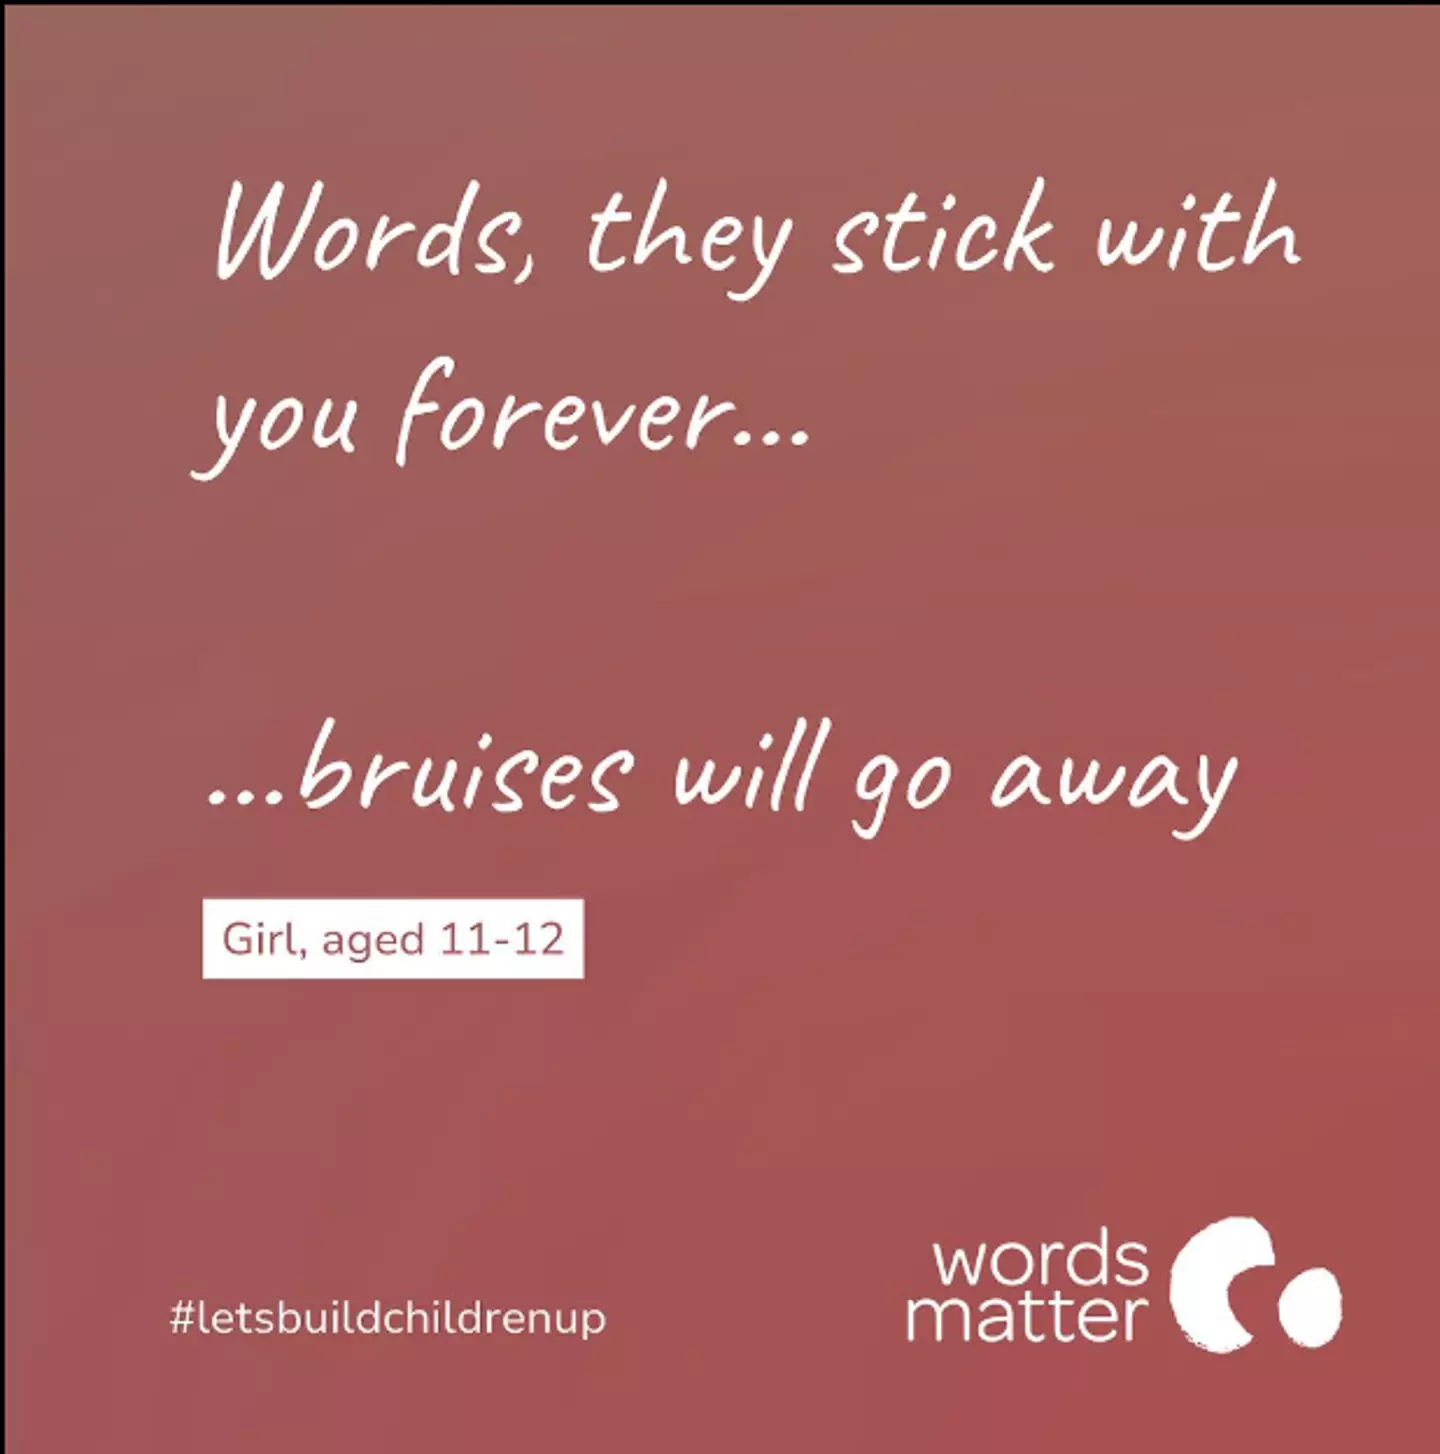 Words Matter has revealed some of the most damaging phrases and words to say to children.